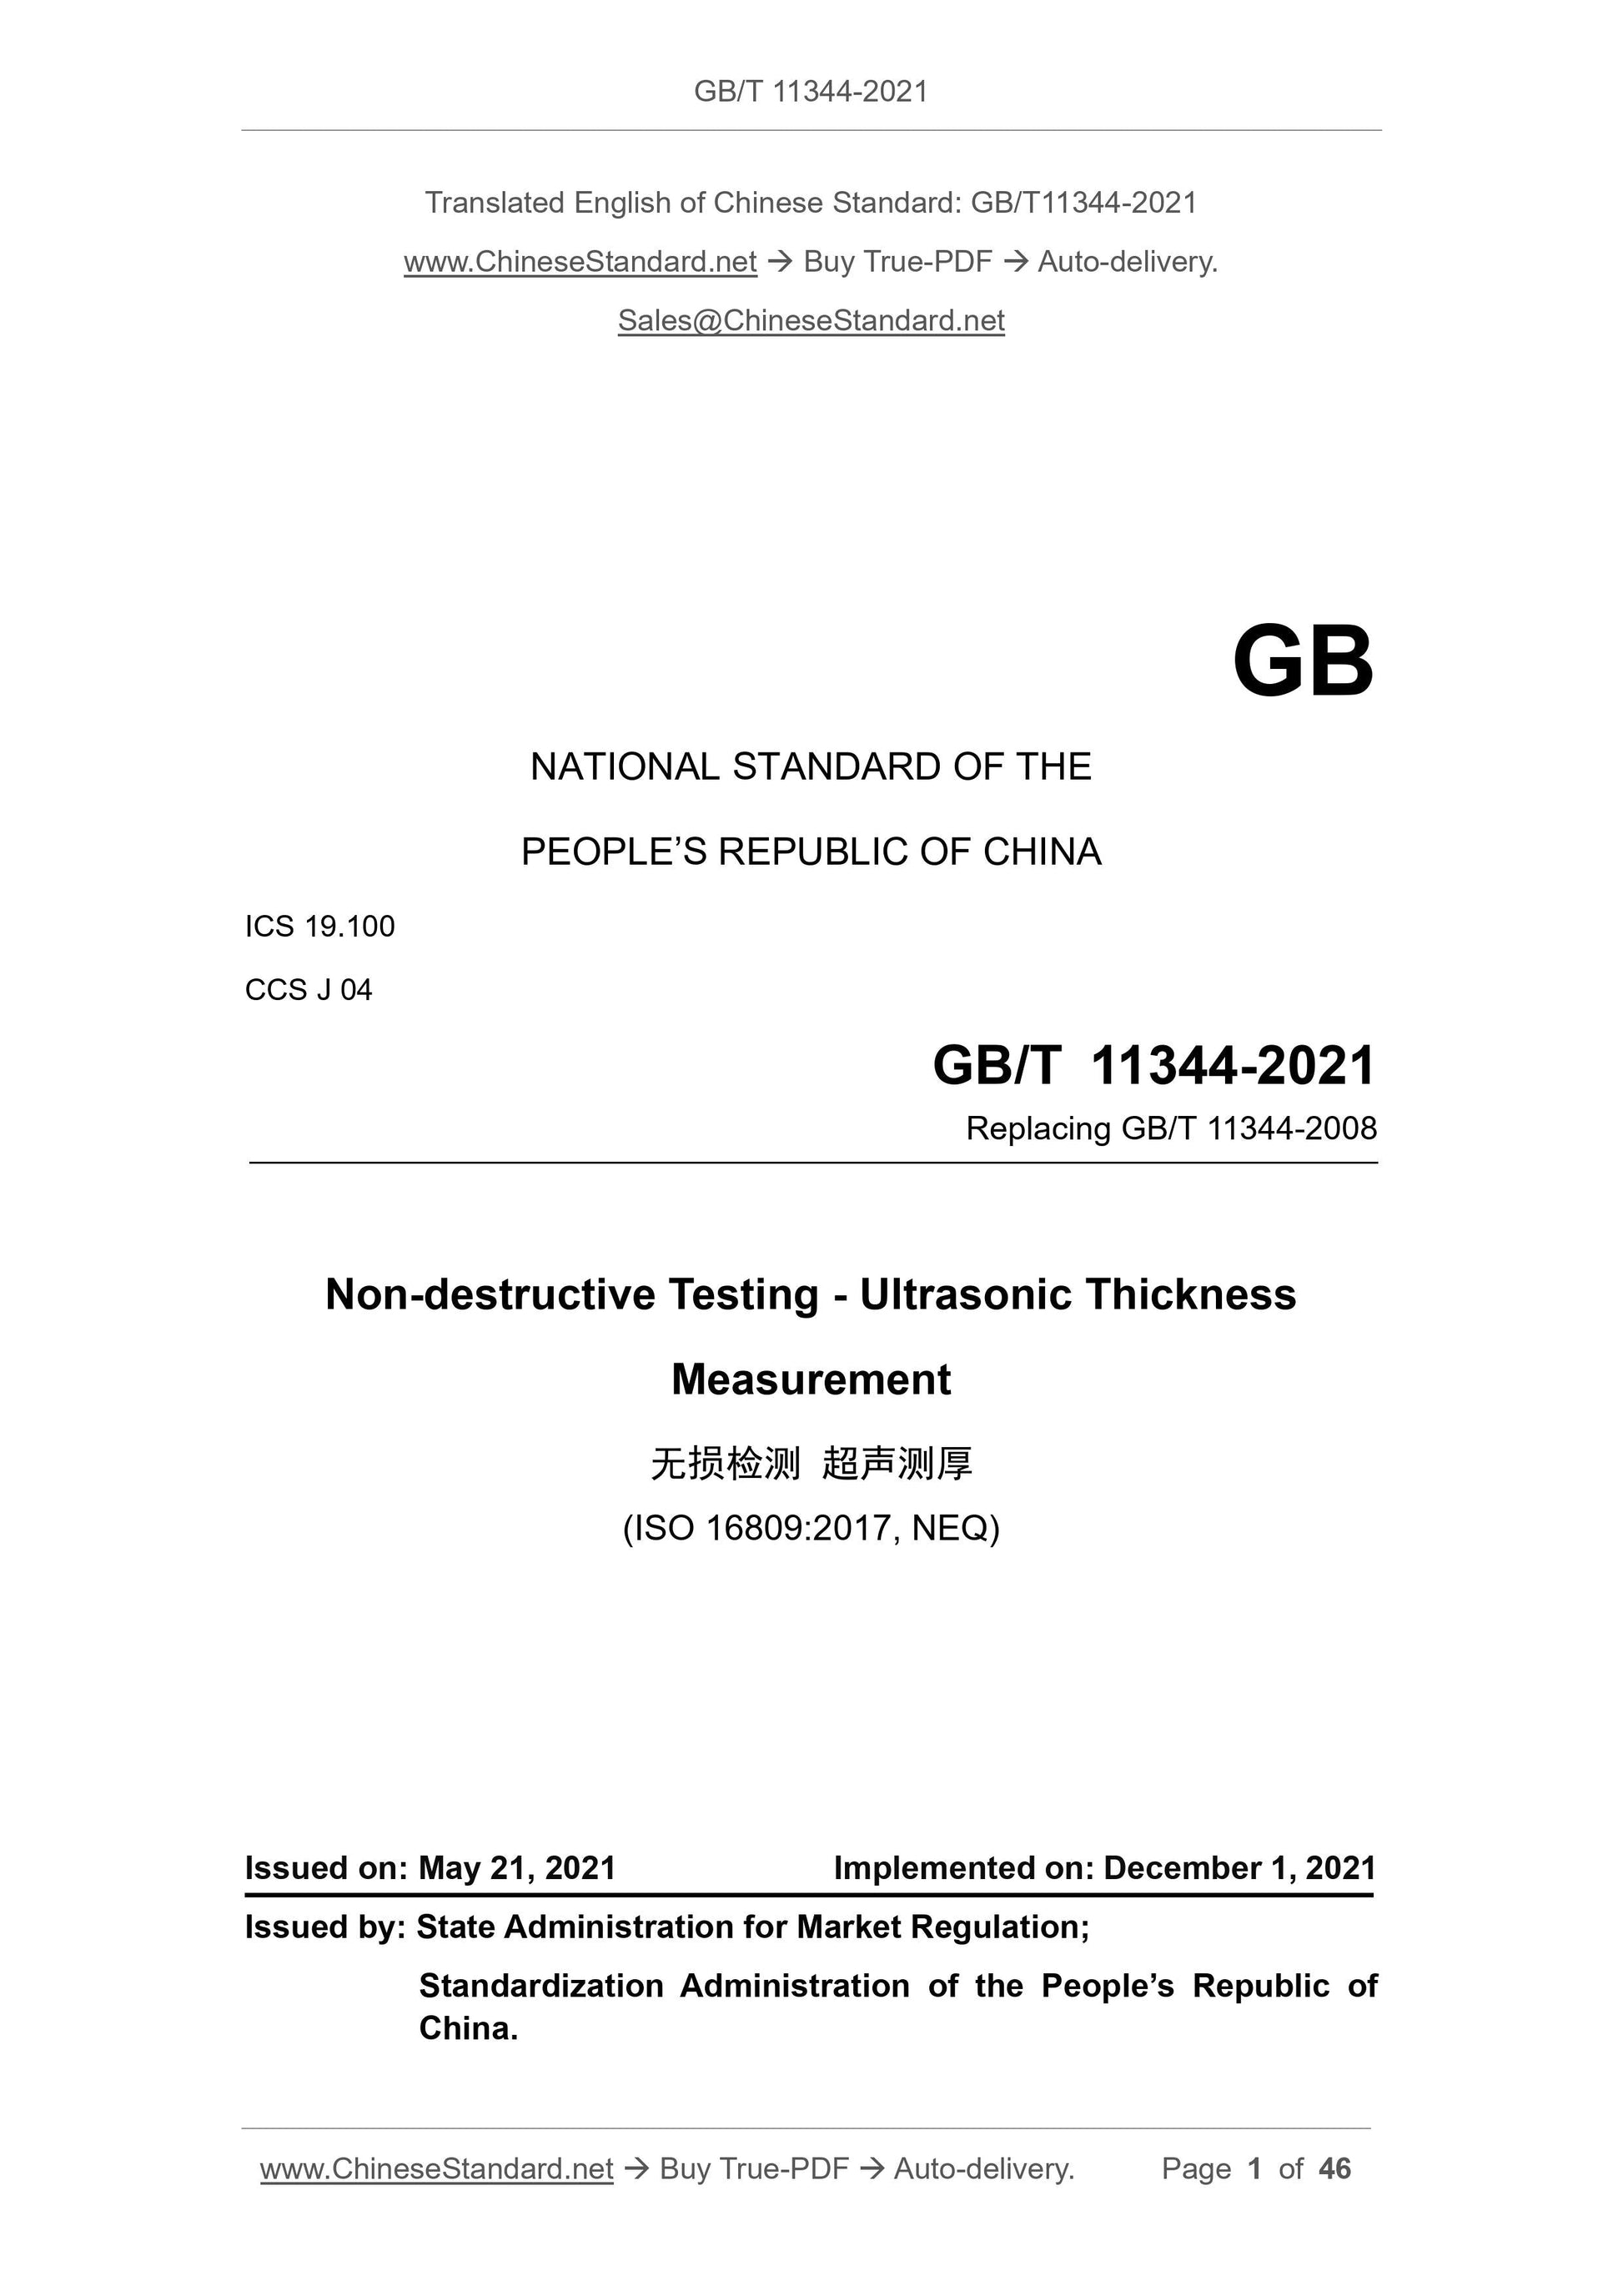 GB/T 11344-2021 Page 1